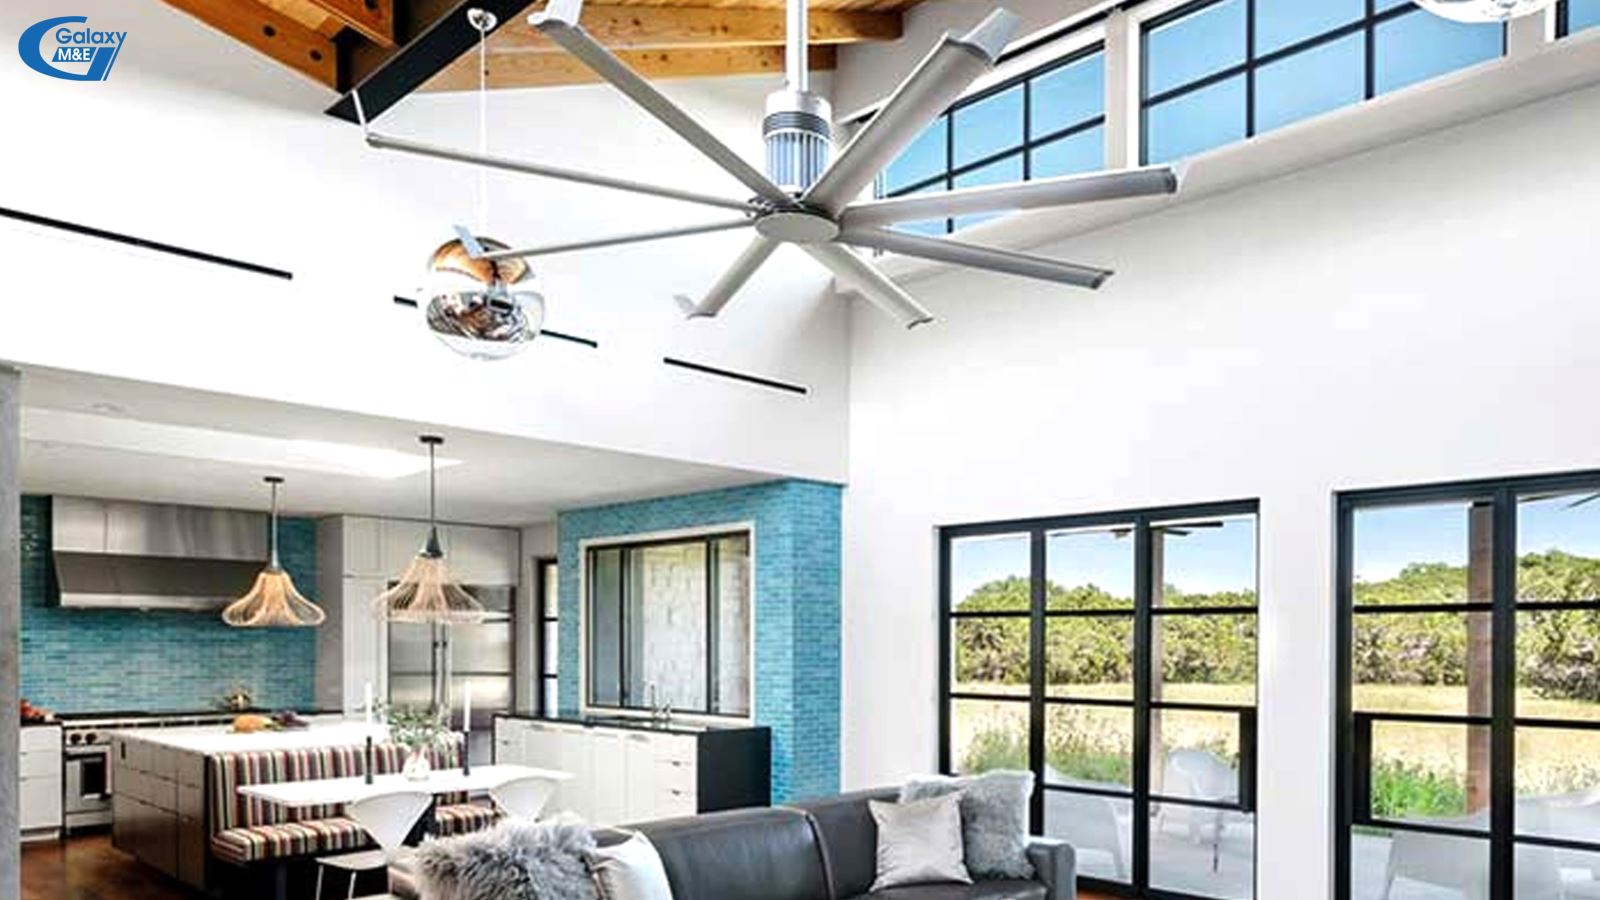 Fans are the most common mean used to ventilate buildings.